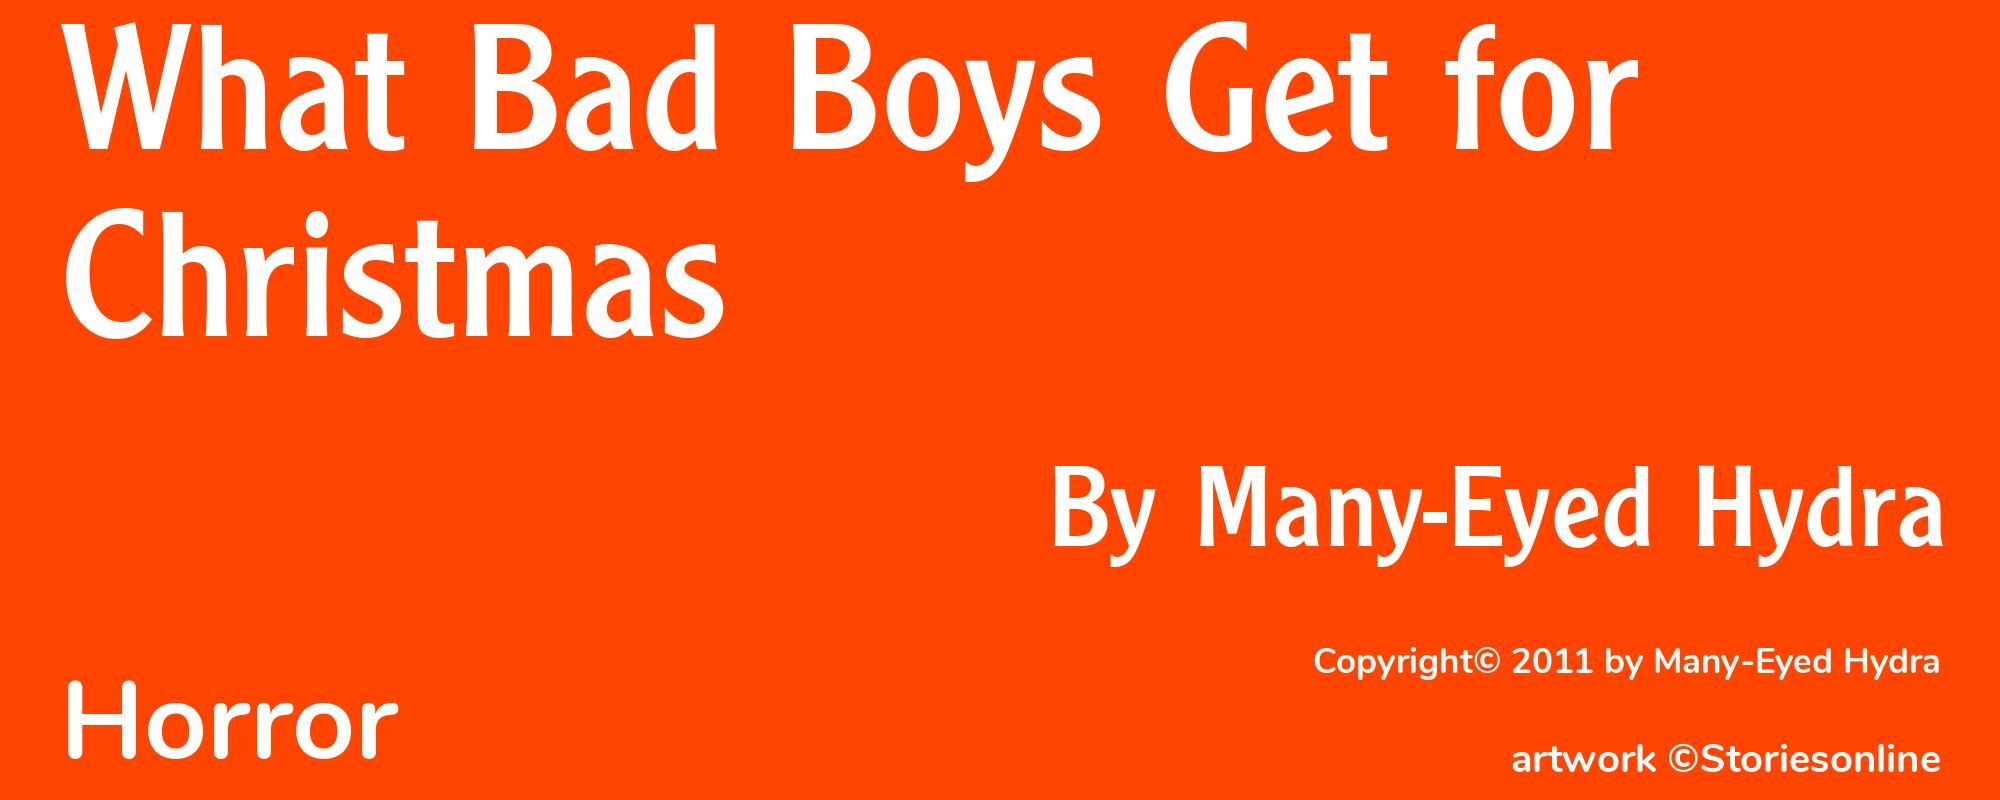 What Bad Boys Get for Christmas - Cover